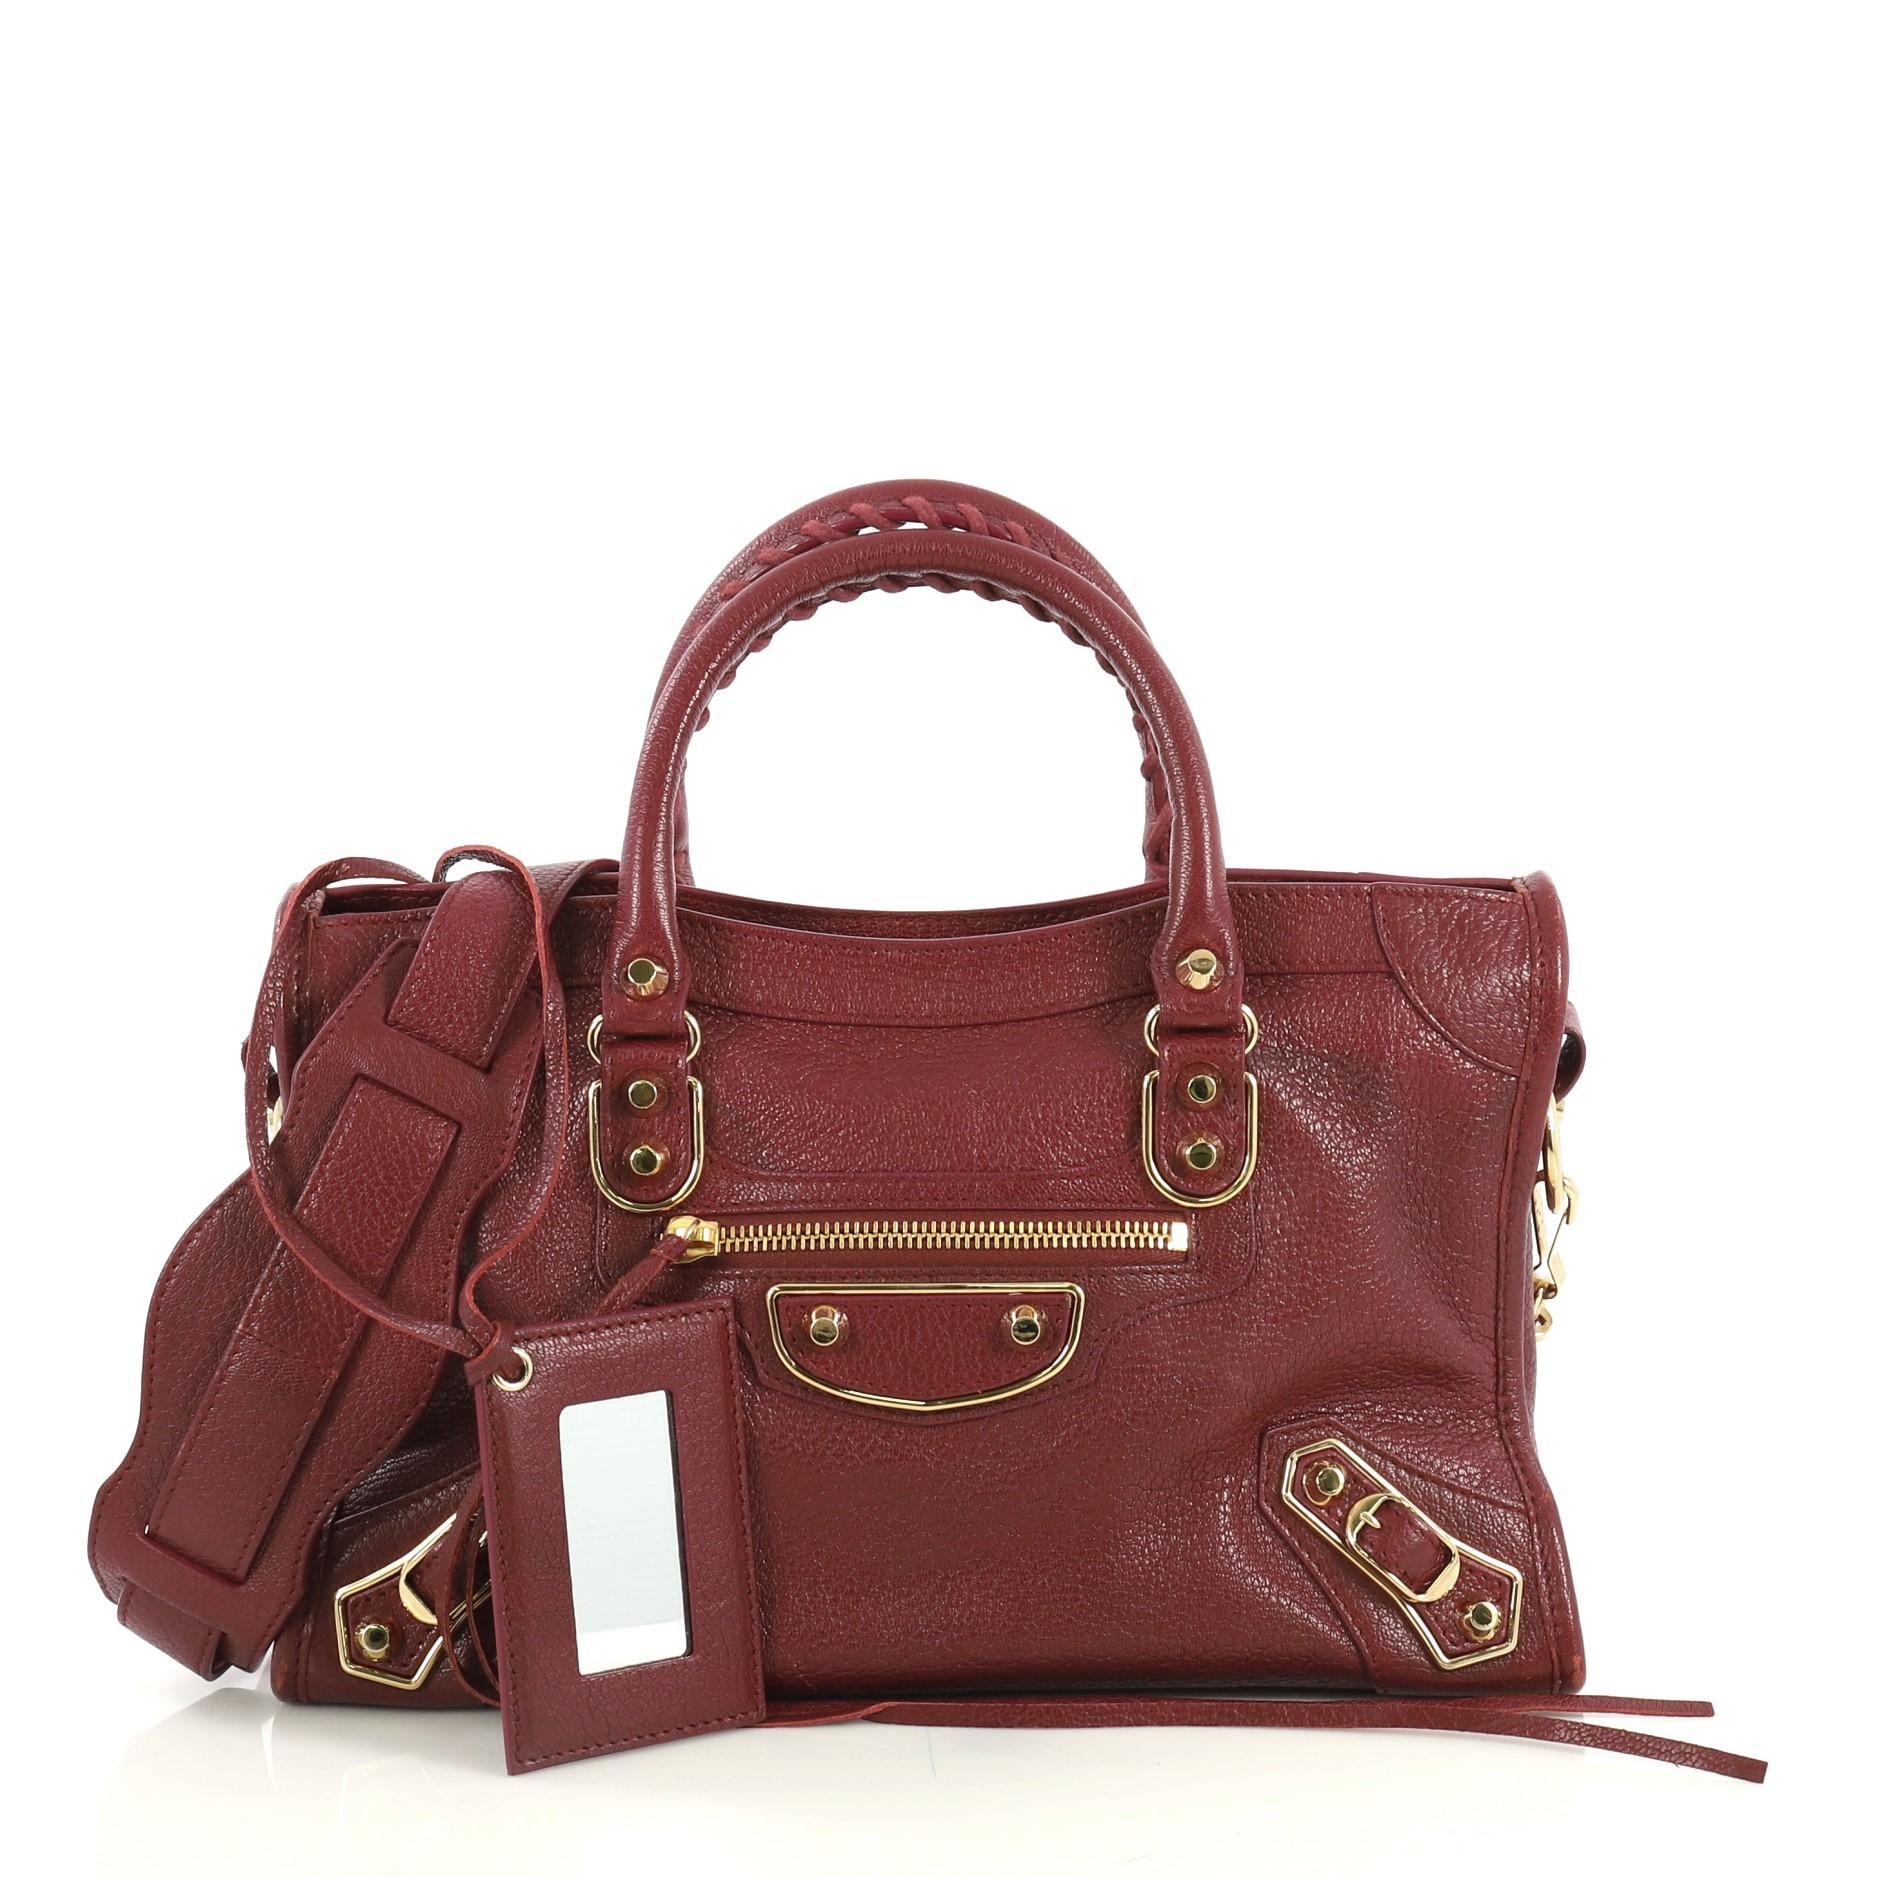 This Balenciaga City Classic Metallic Edge Bag Leather Small crafted from red leather, features dual braided woven handles, studs and buckle details, front zip pocket, and gold-tone hardware. Its top zip closure opens to a black fabric interior with